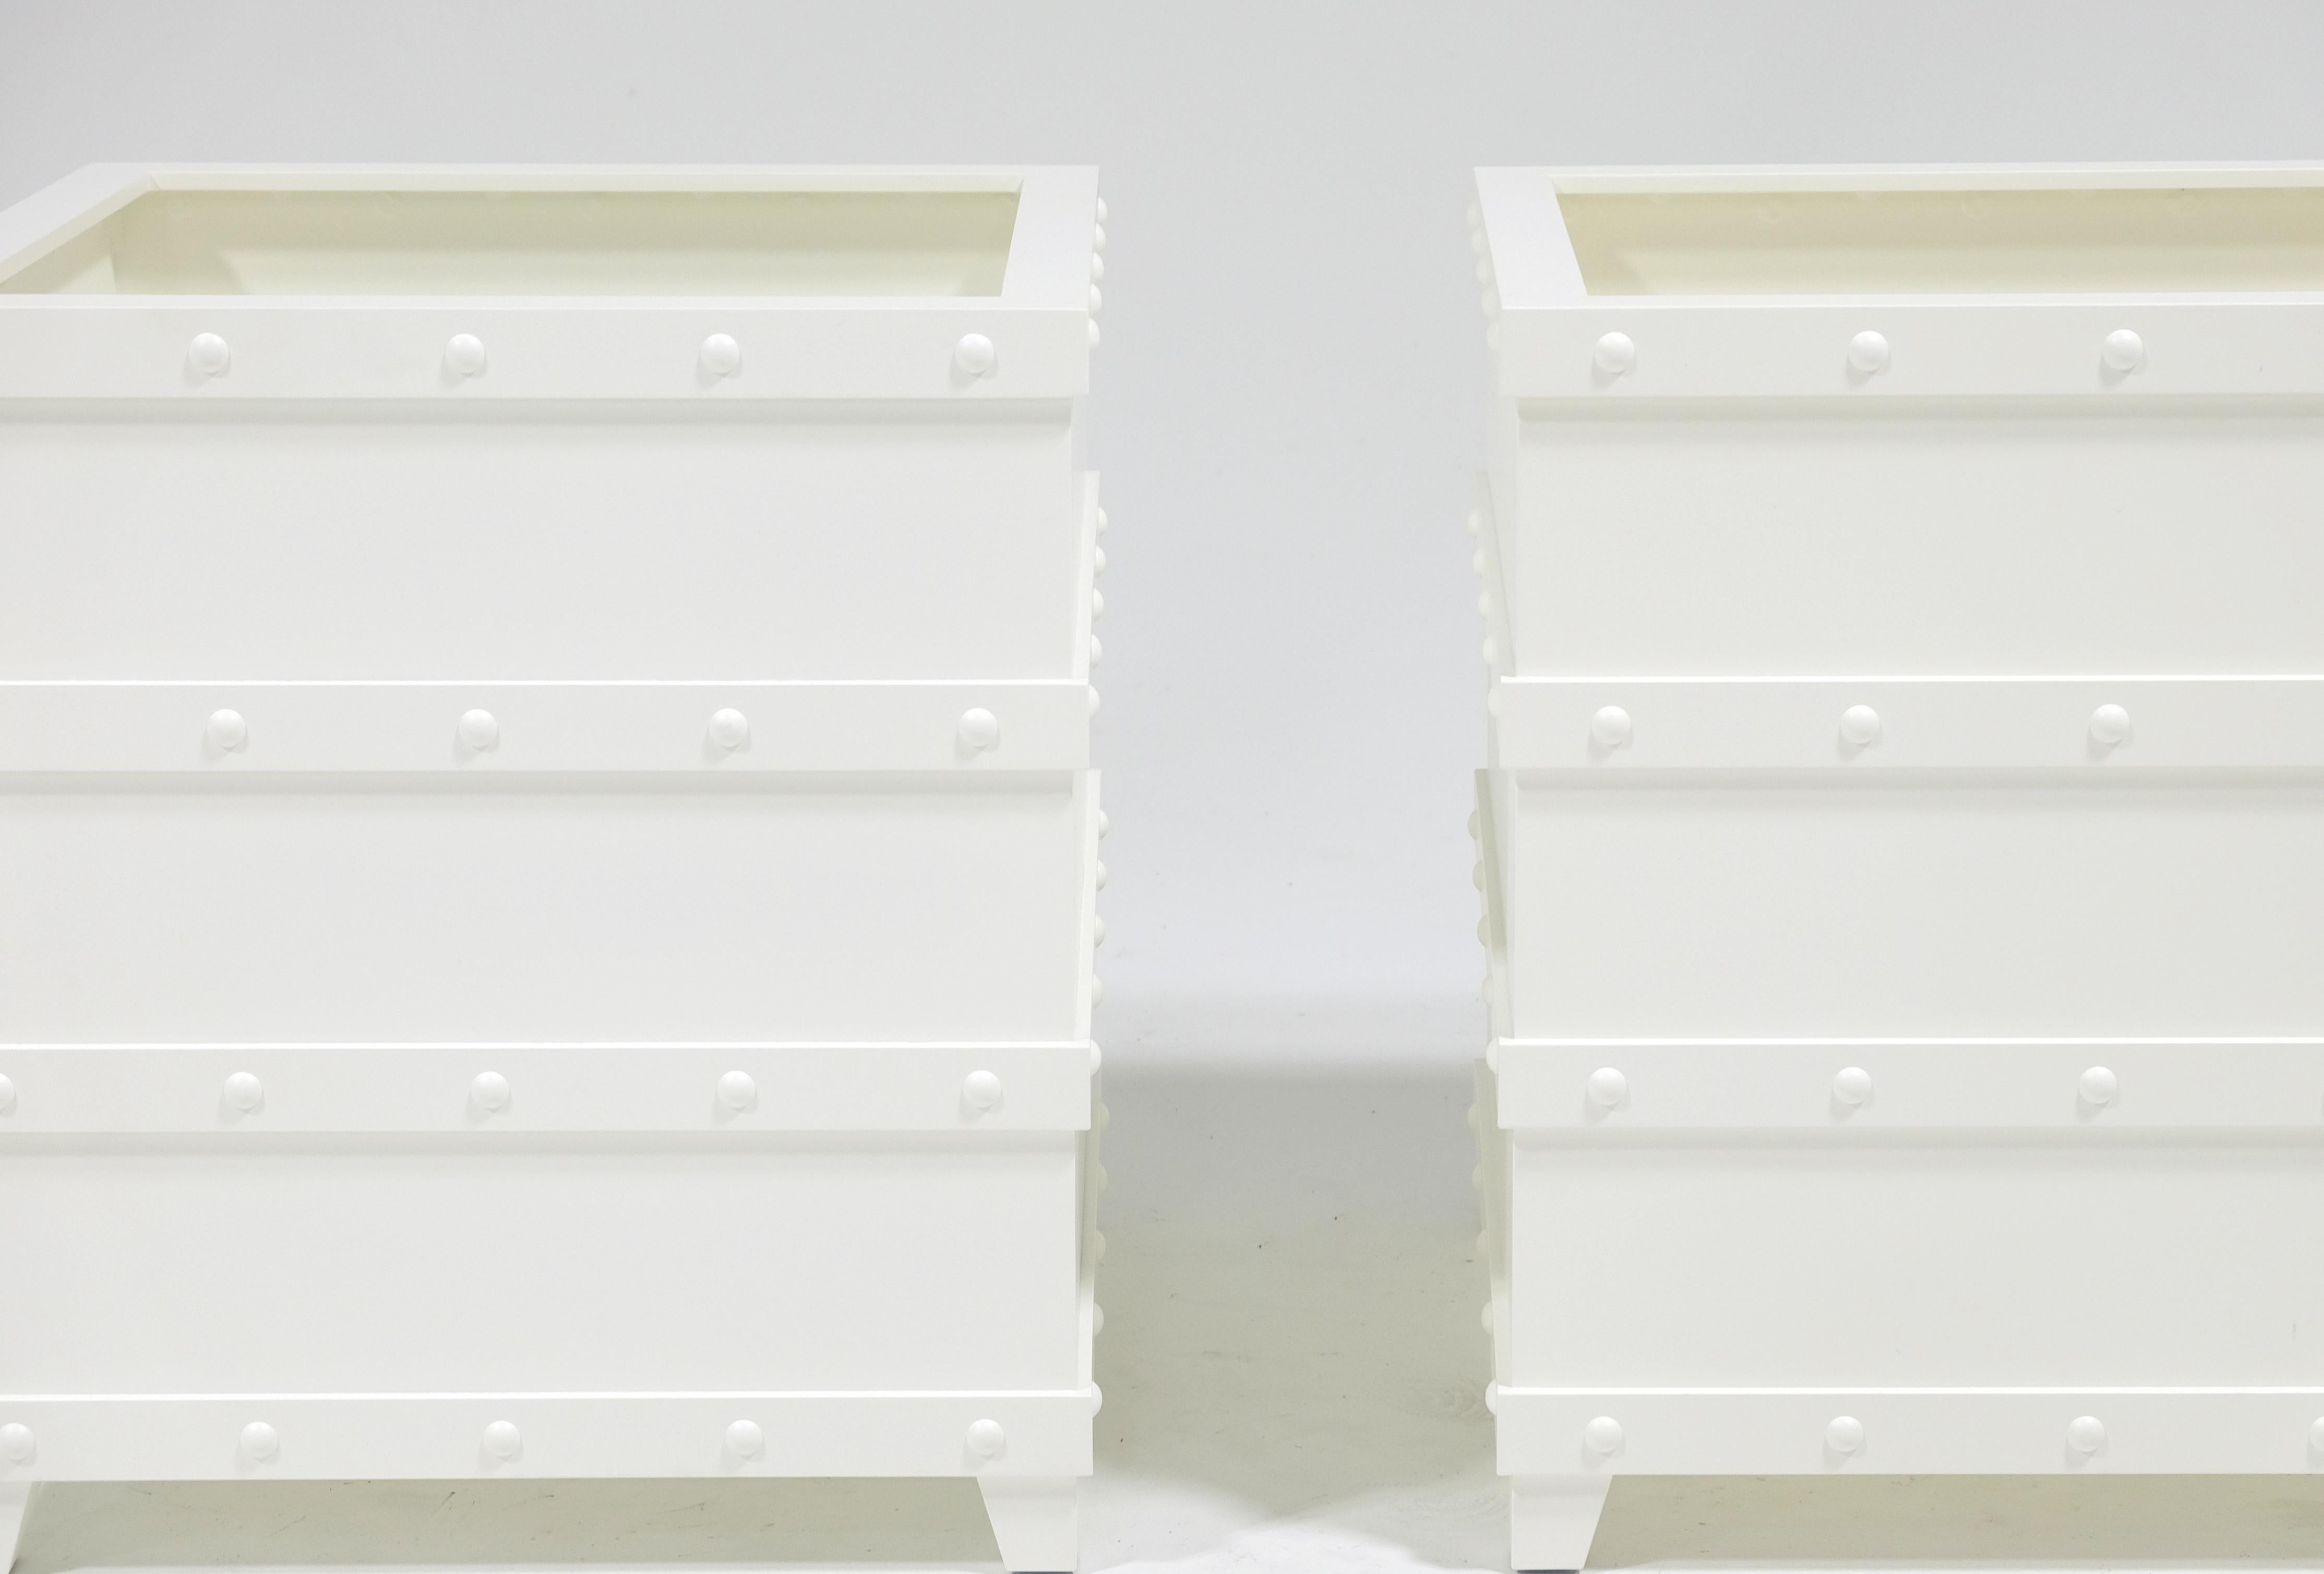 McKinnon and Harris pair of Inverlussa Palm boxes with Rivets in Classic white finish. Our signature Inverlussa banding is handcut, double mitered, drilled and rosette welded. With robust aluminum angles executed with precision by our master